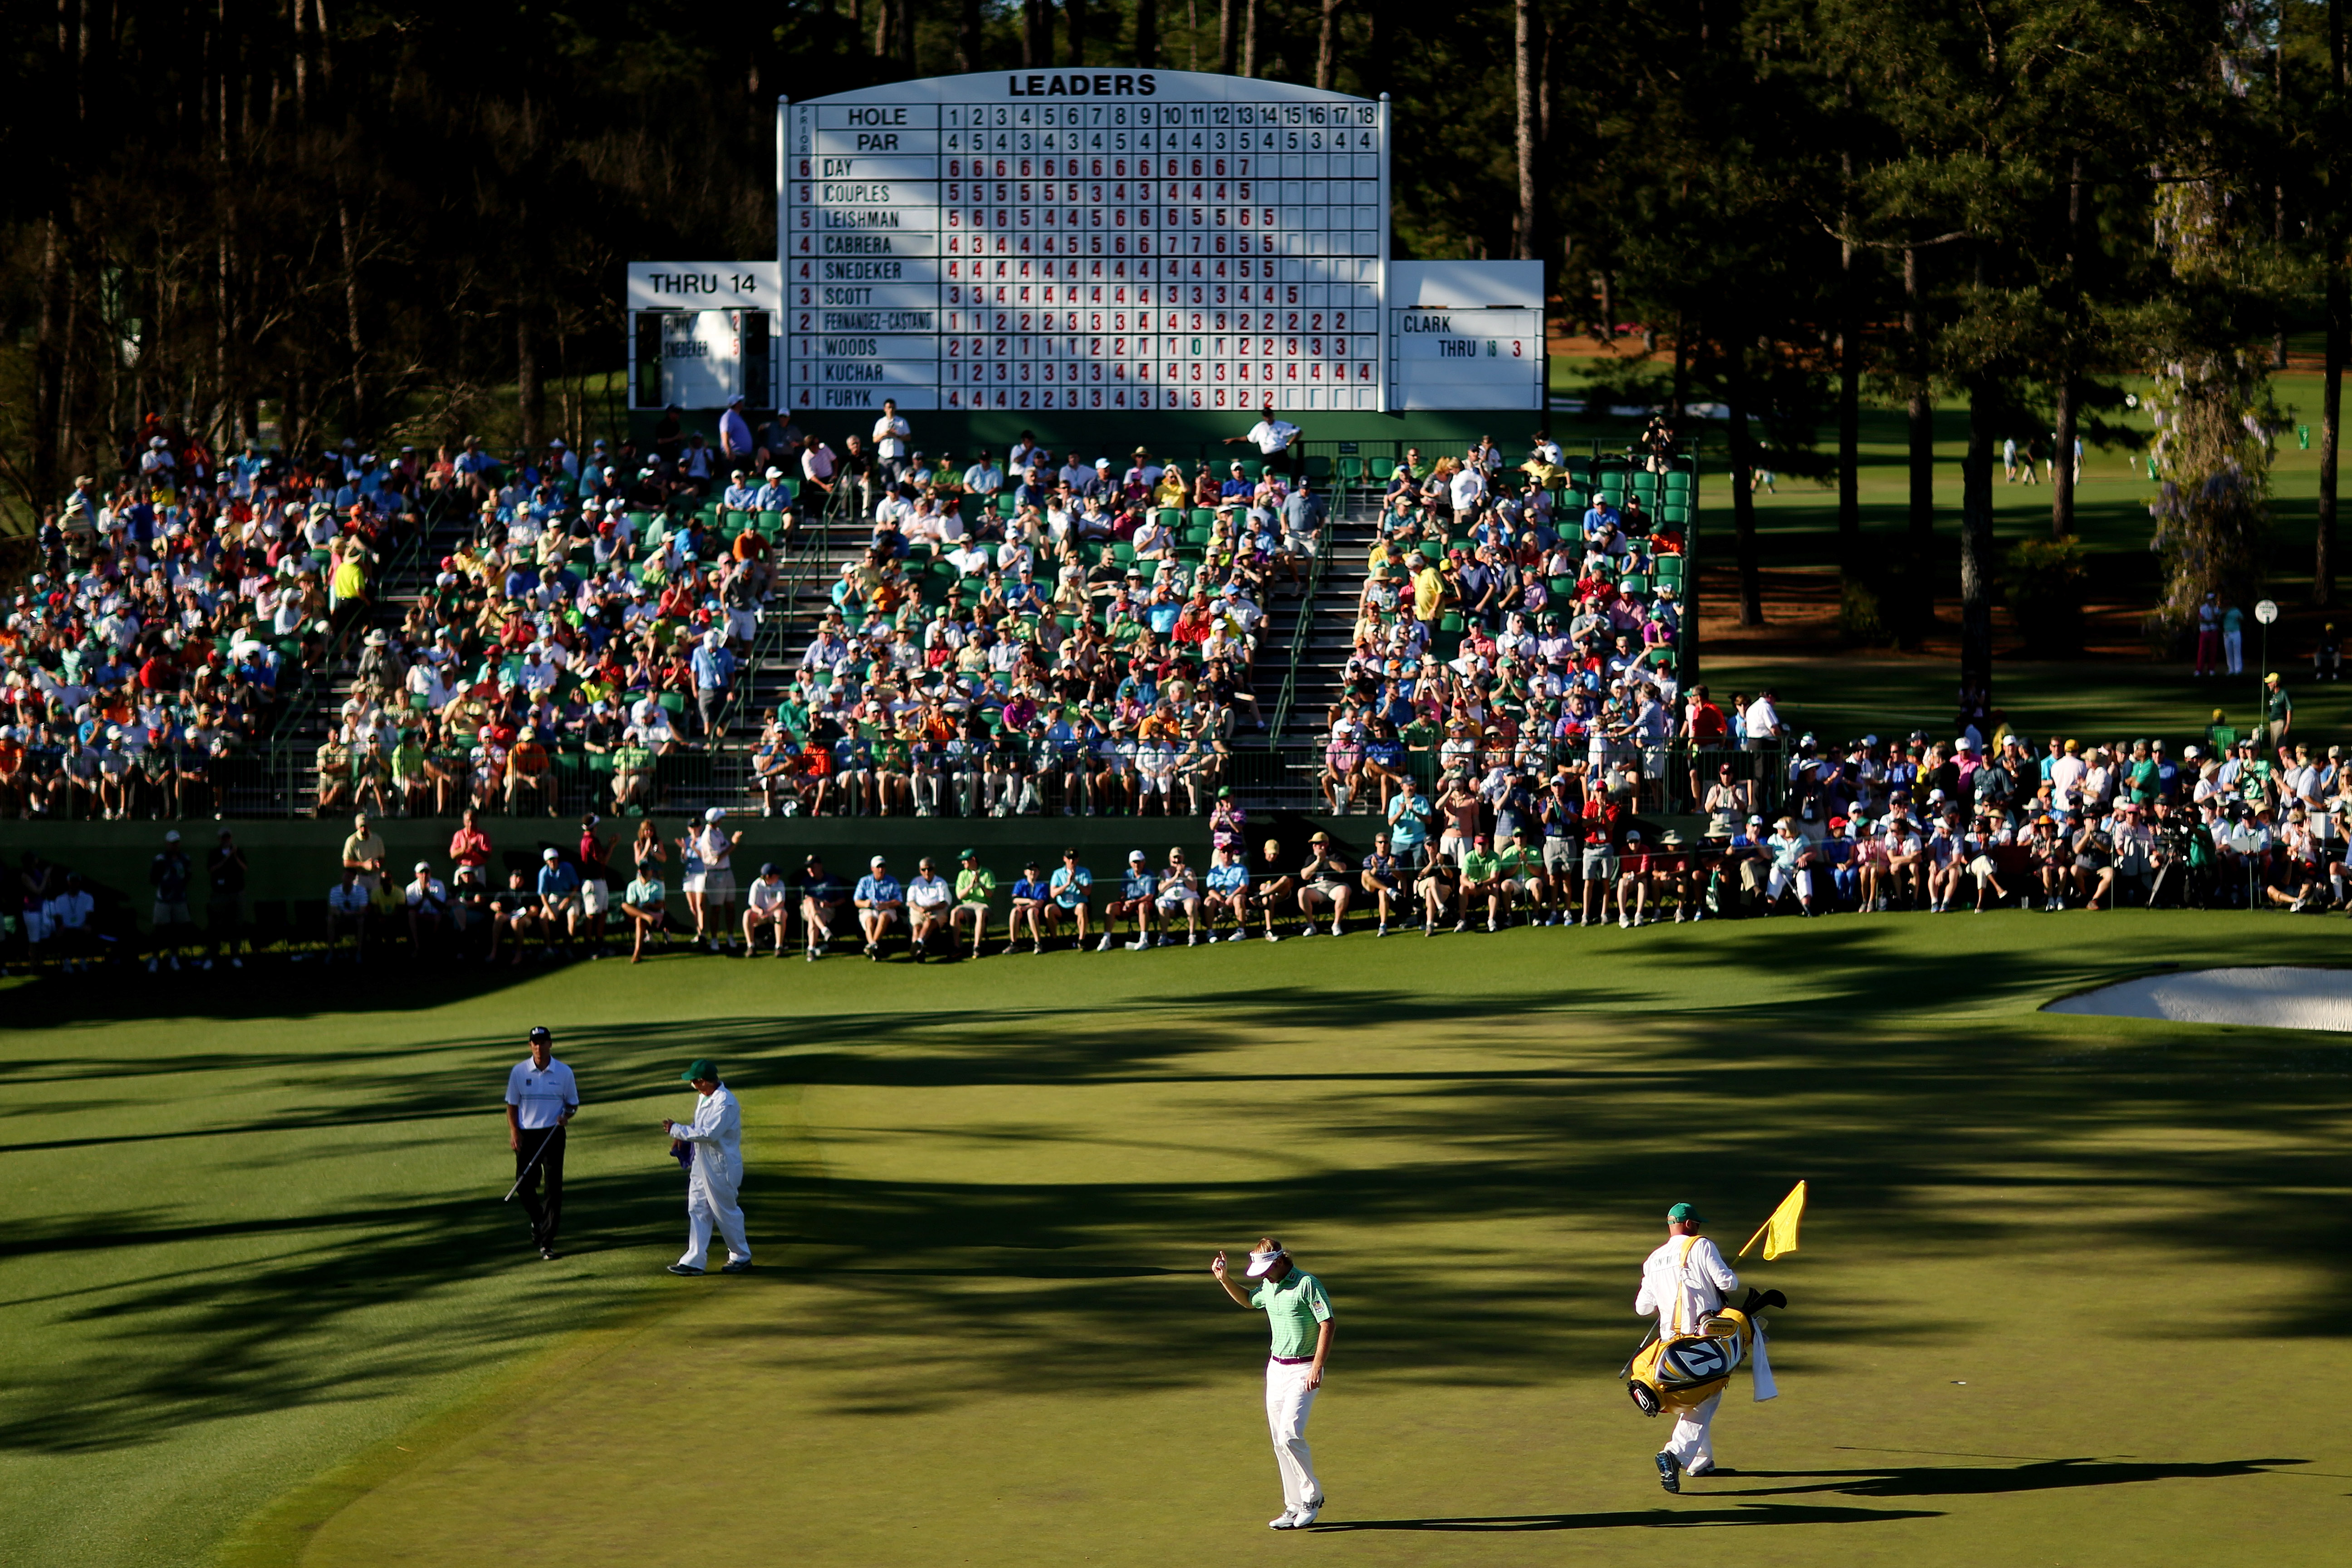 April 13, 2013 in Augusta, Georgia. (Credit: Mike Ehrmann/Getty Images